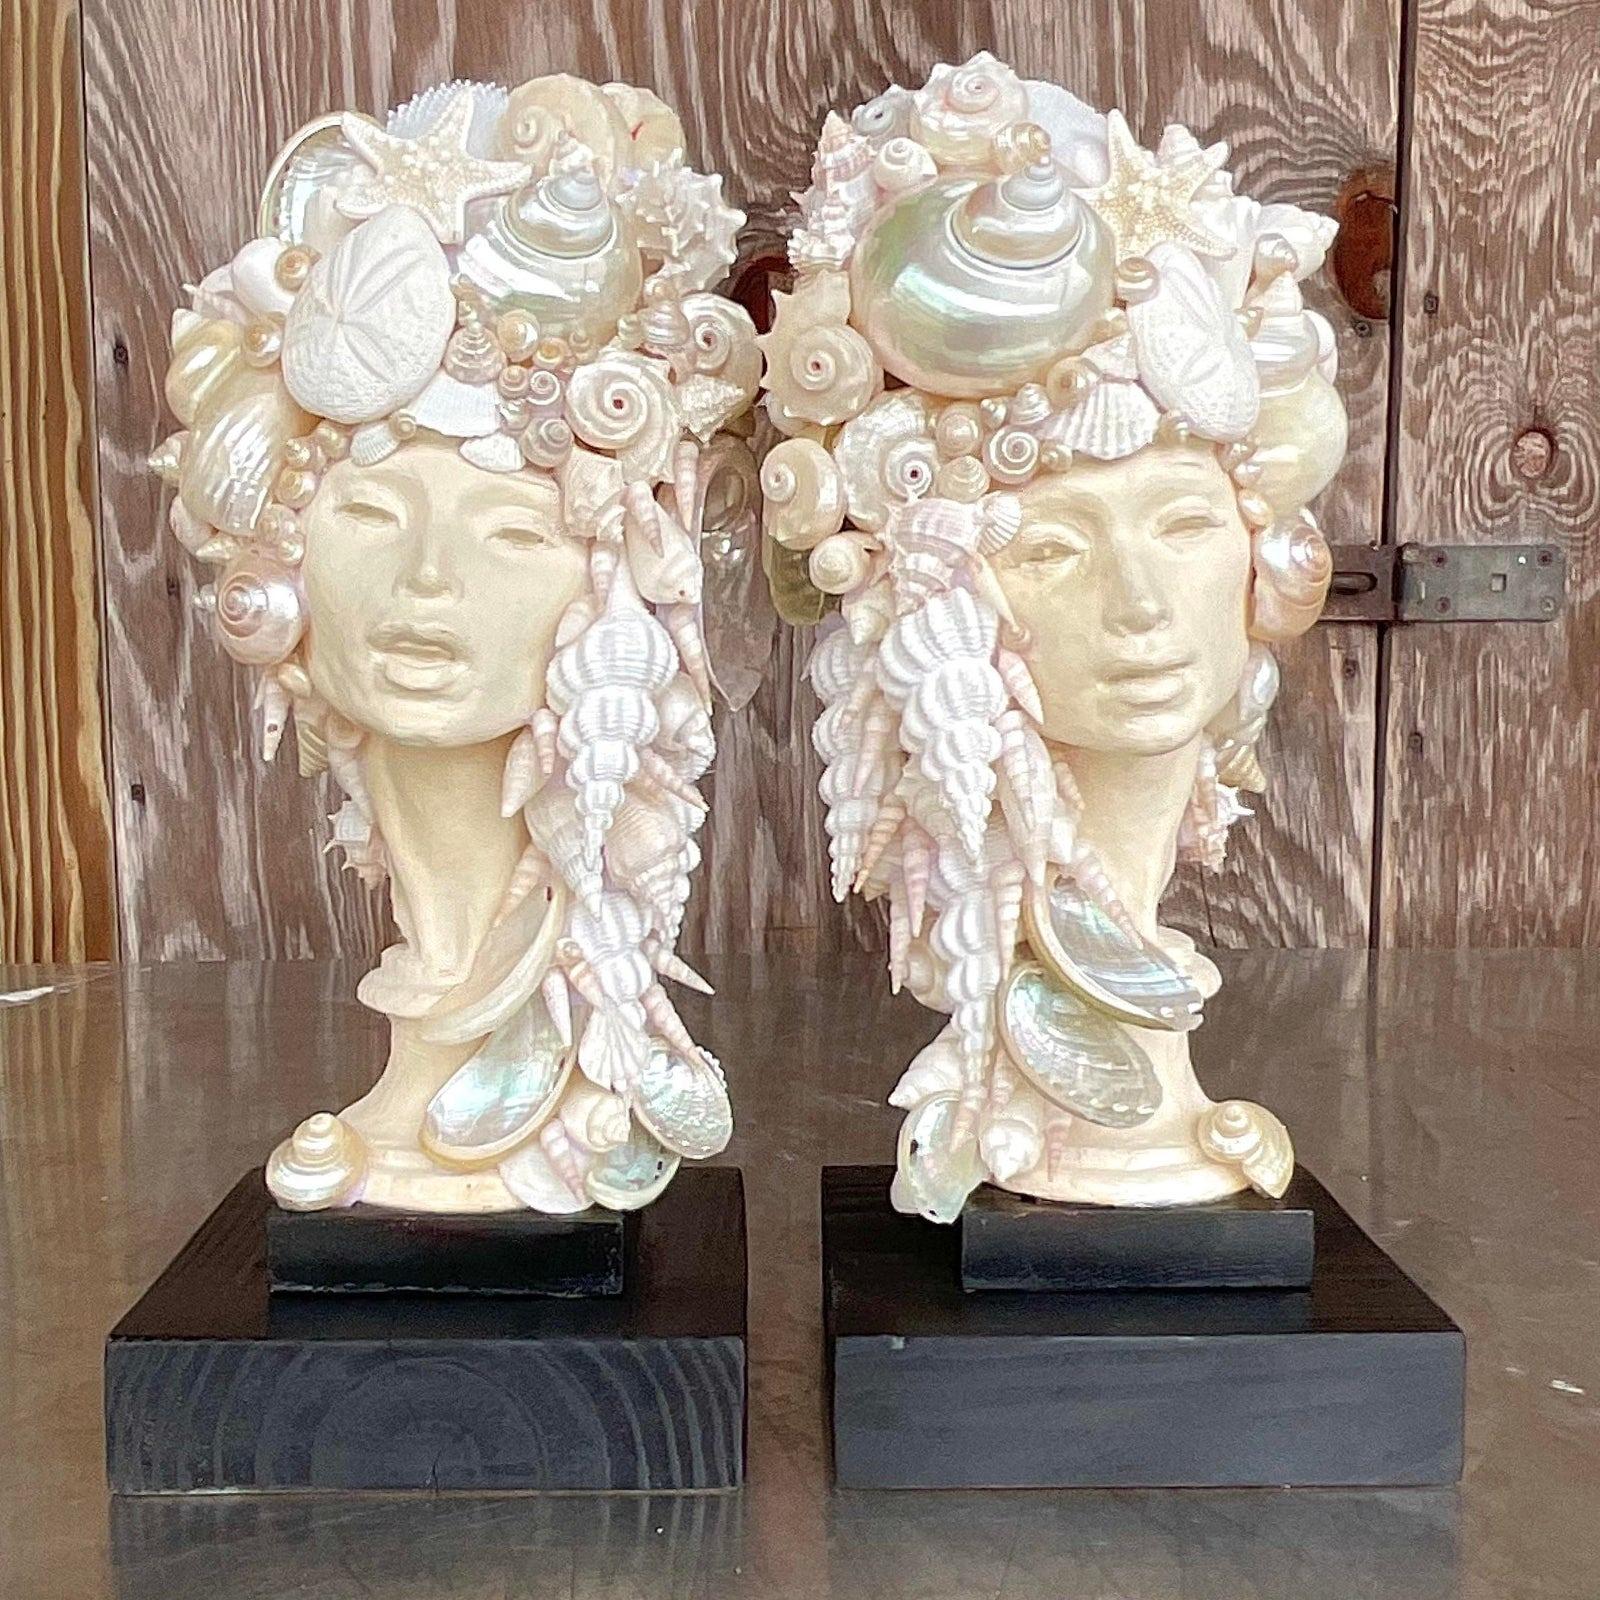 North American Early 21st Century Coastal Shell Bust of Women - a Pair For Sale